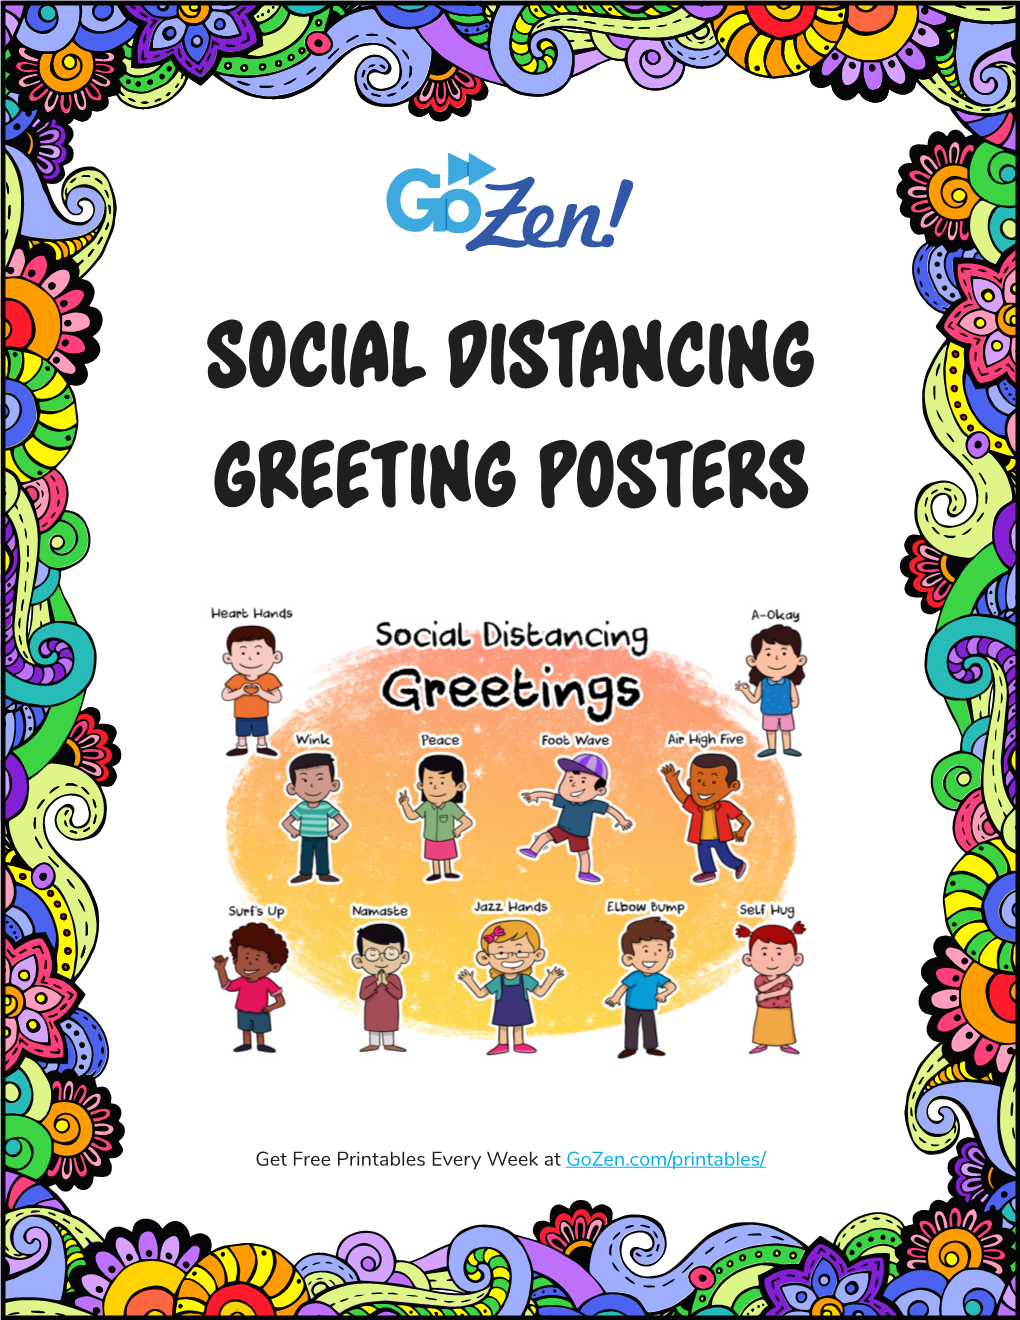 Social Distancing Greeting Posters